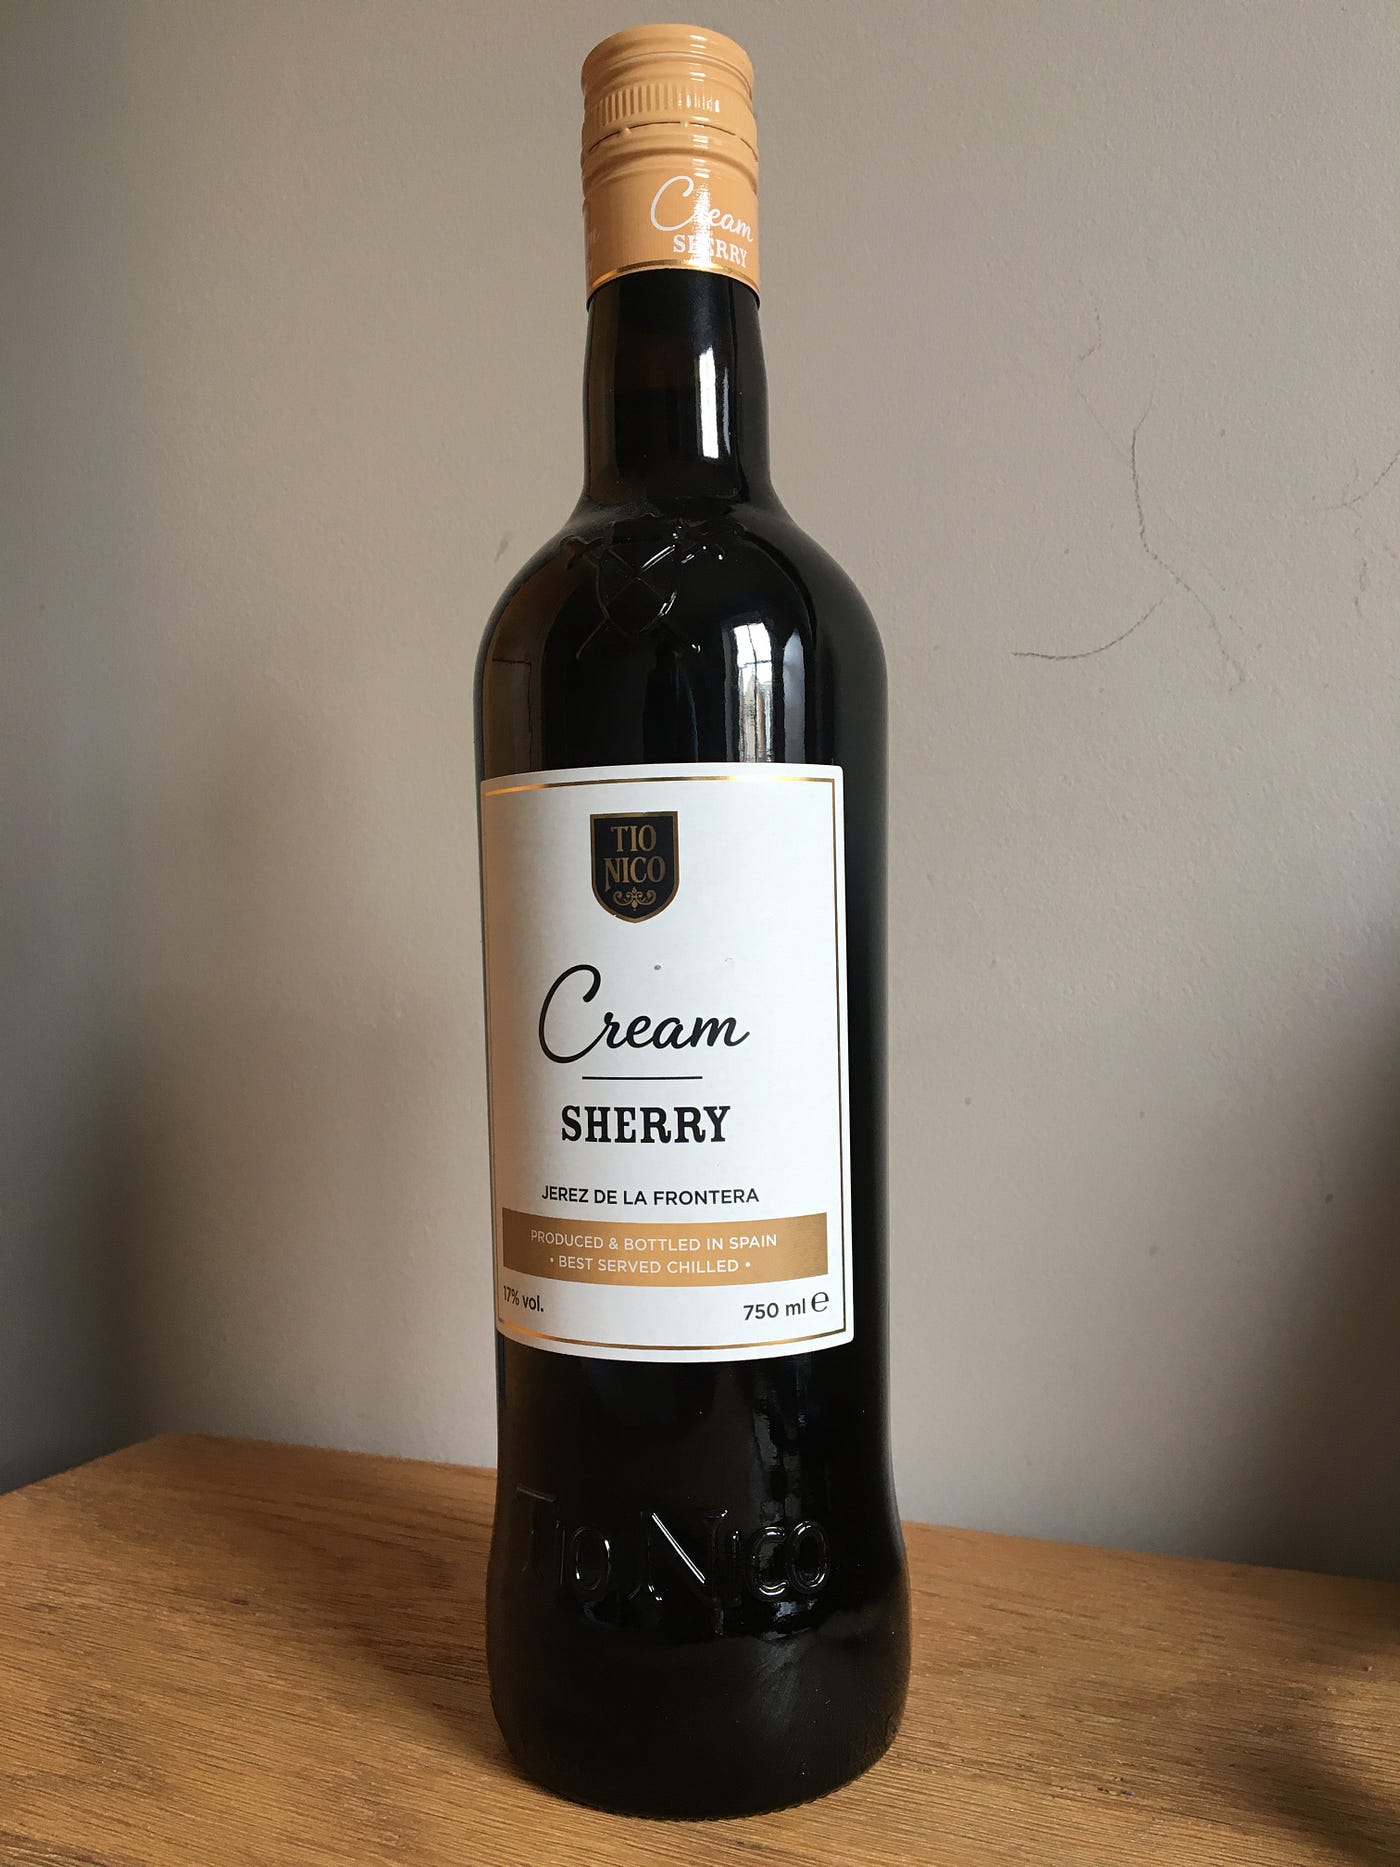 Lidl\'s Tio Nico Cream Sherry. An entry-level cream sherry from Lidl | by  Tom Lewis | Medium